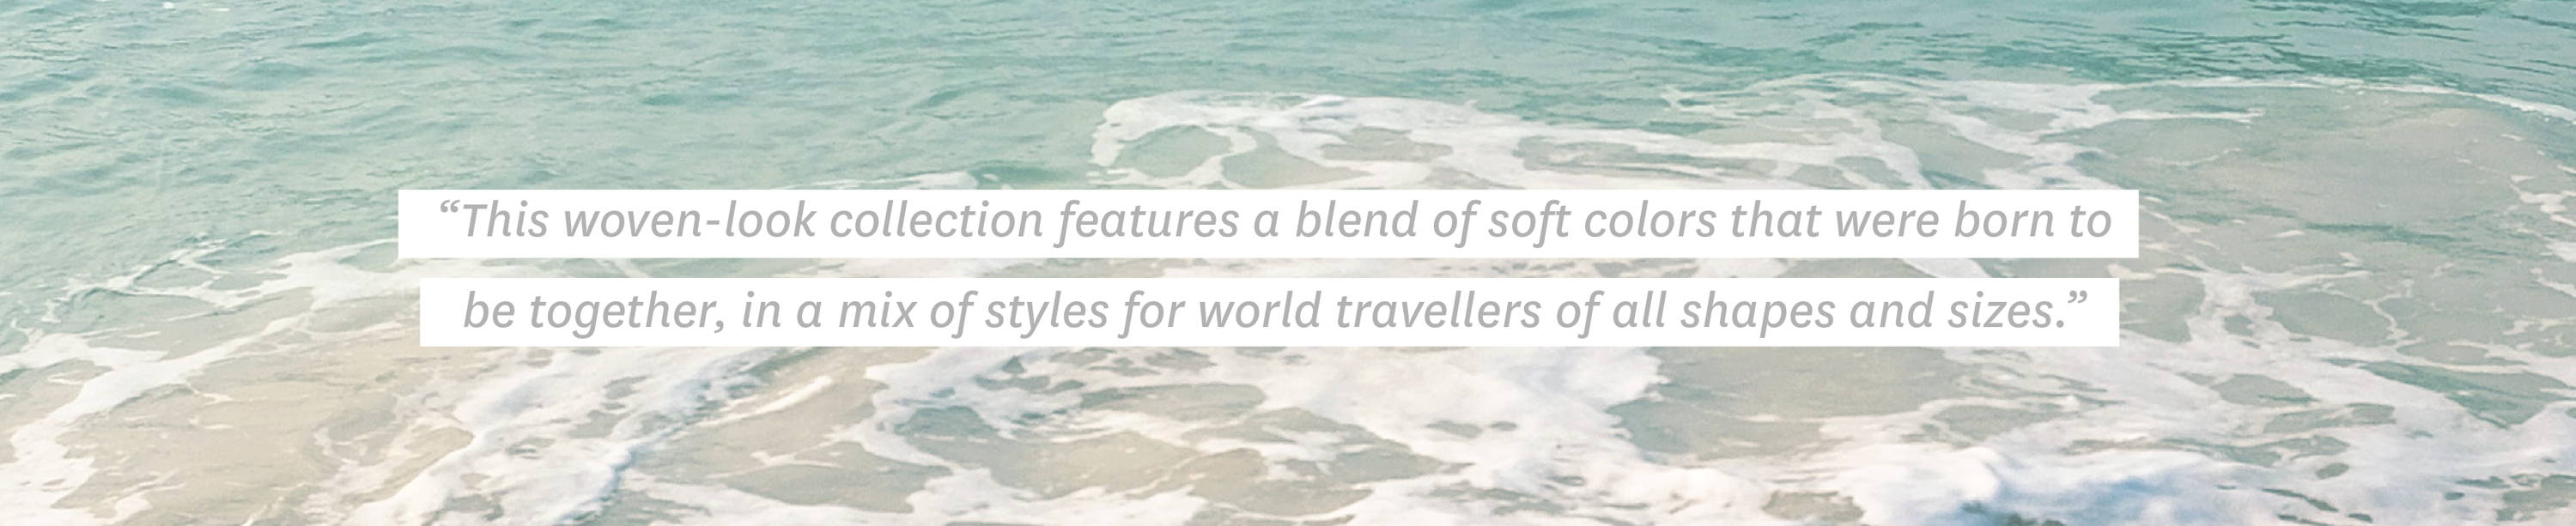 Quote: "This woven-look collection features a blend of soft colors that were born to be together, in a mix of styles for world travellers of all shapes and sizes."